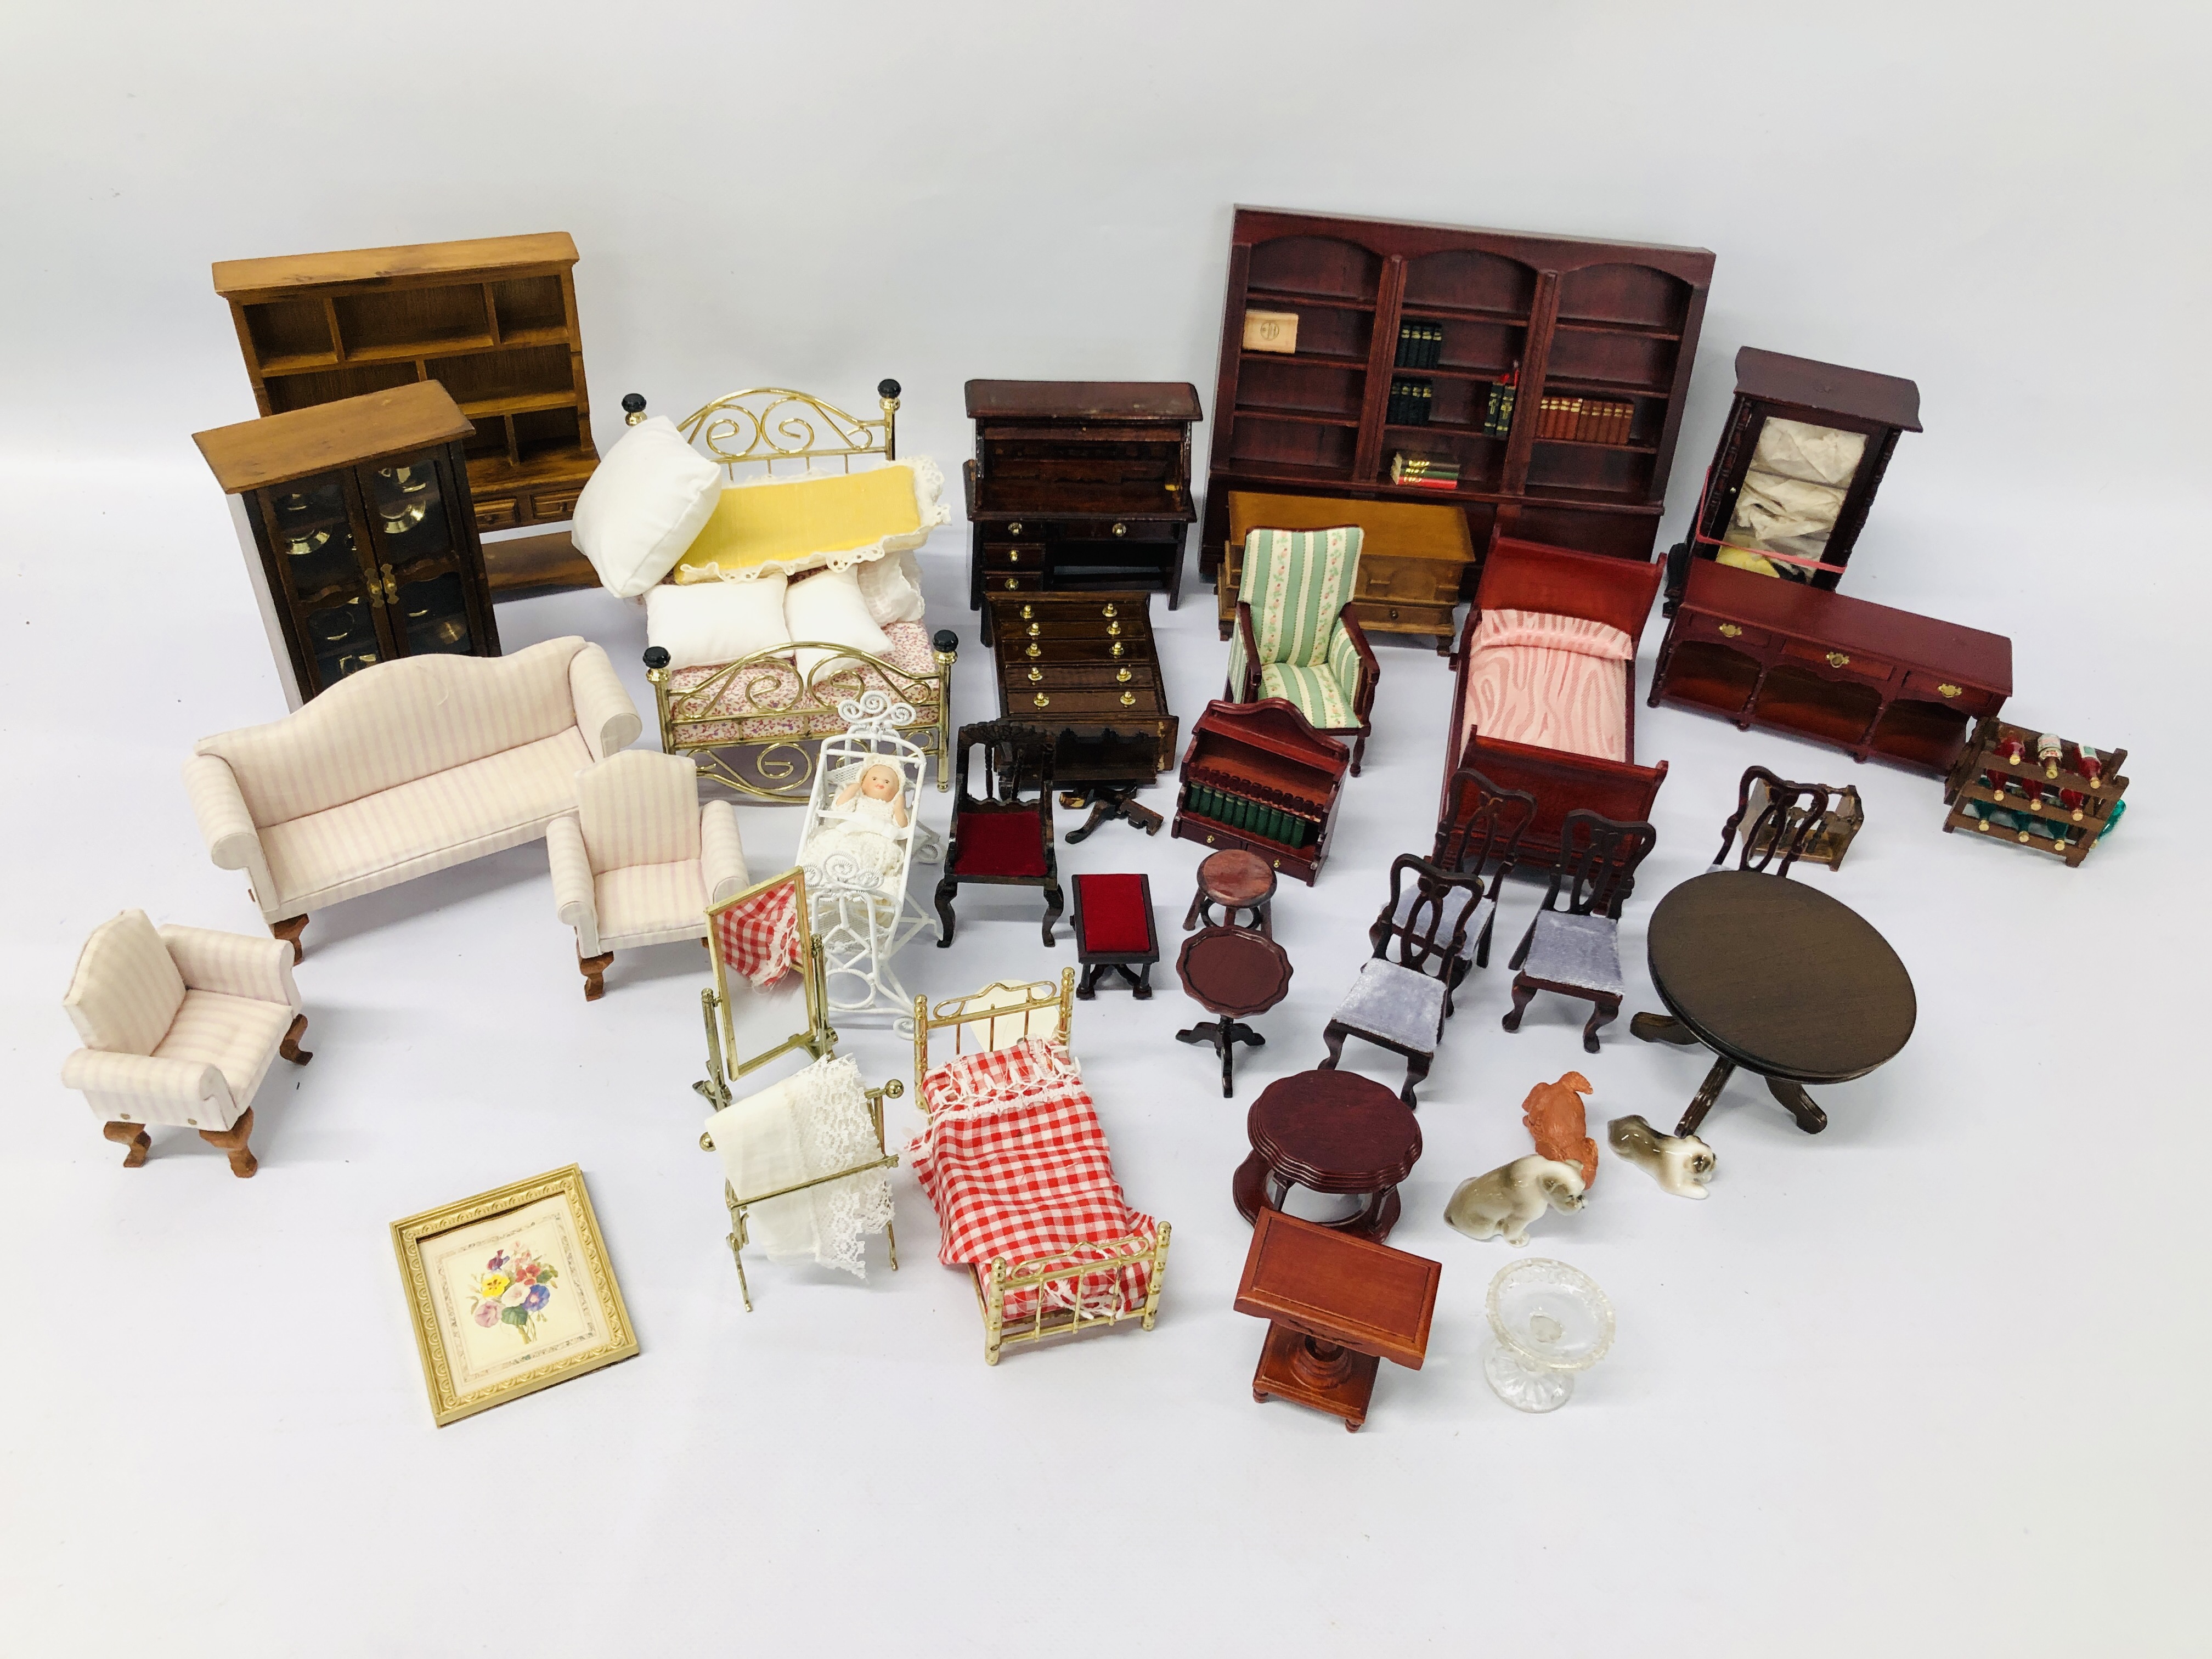 A LARGE PLASTIC BOX CONTAINING EXTENSIVE COLLECTION OF DOLLS HOUSE FURNITURE